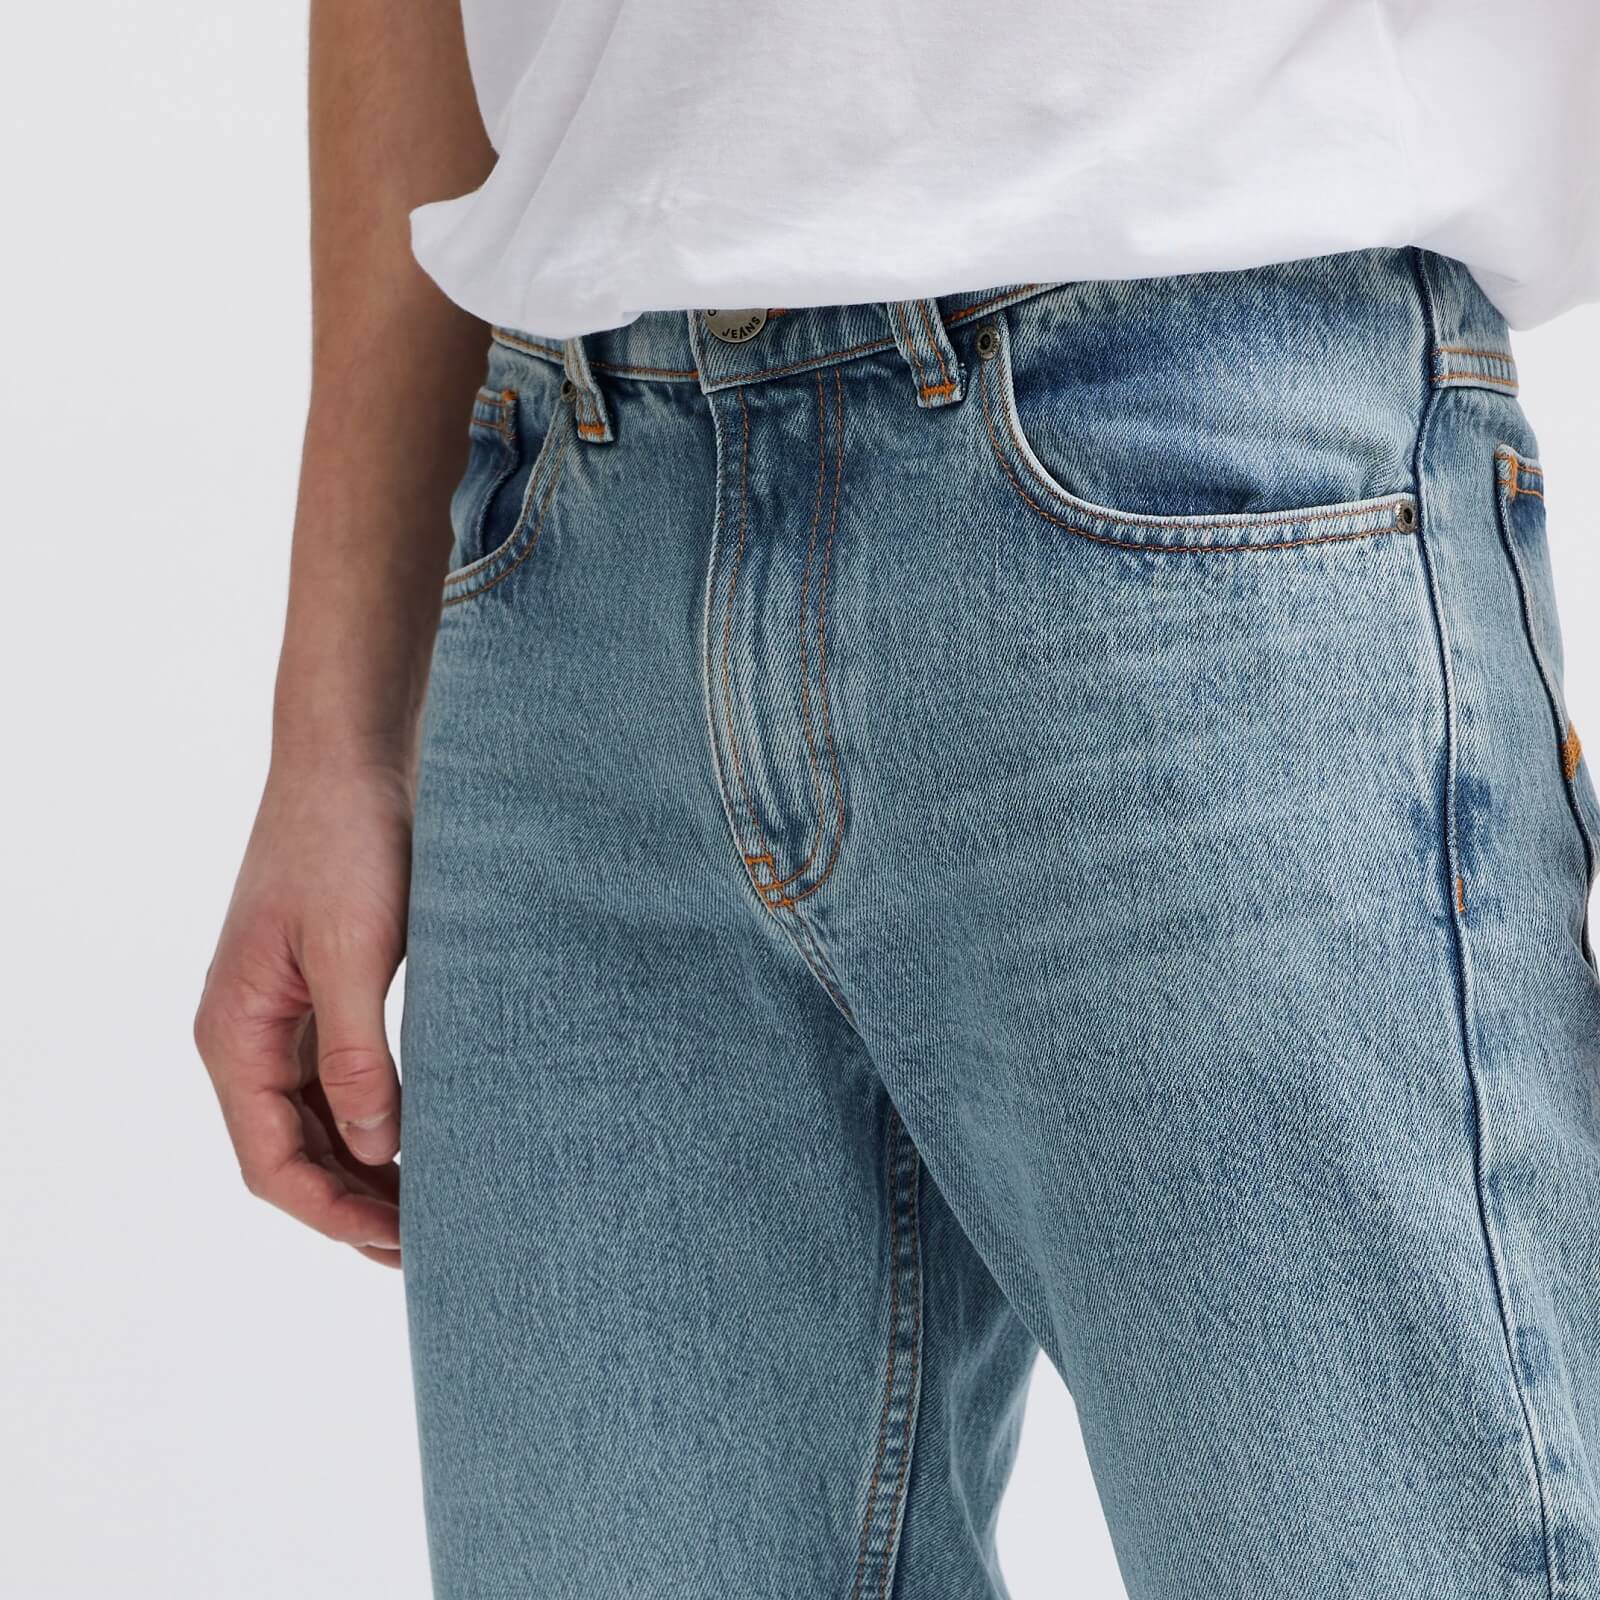 Men's sustainable jeans